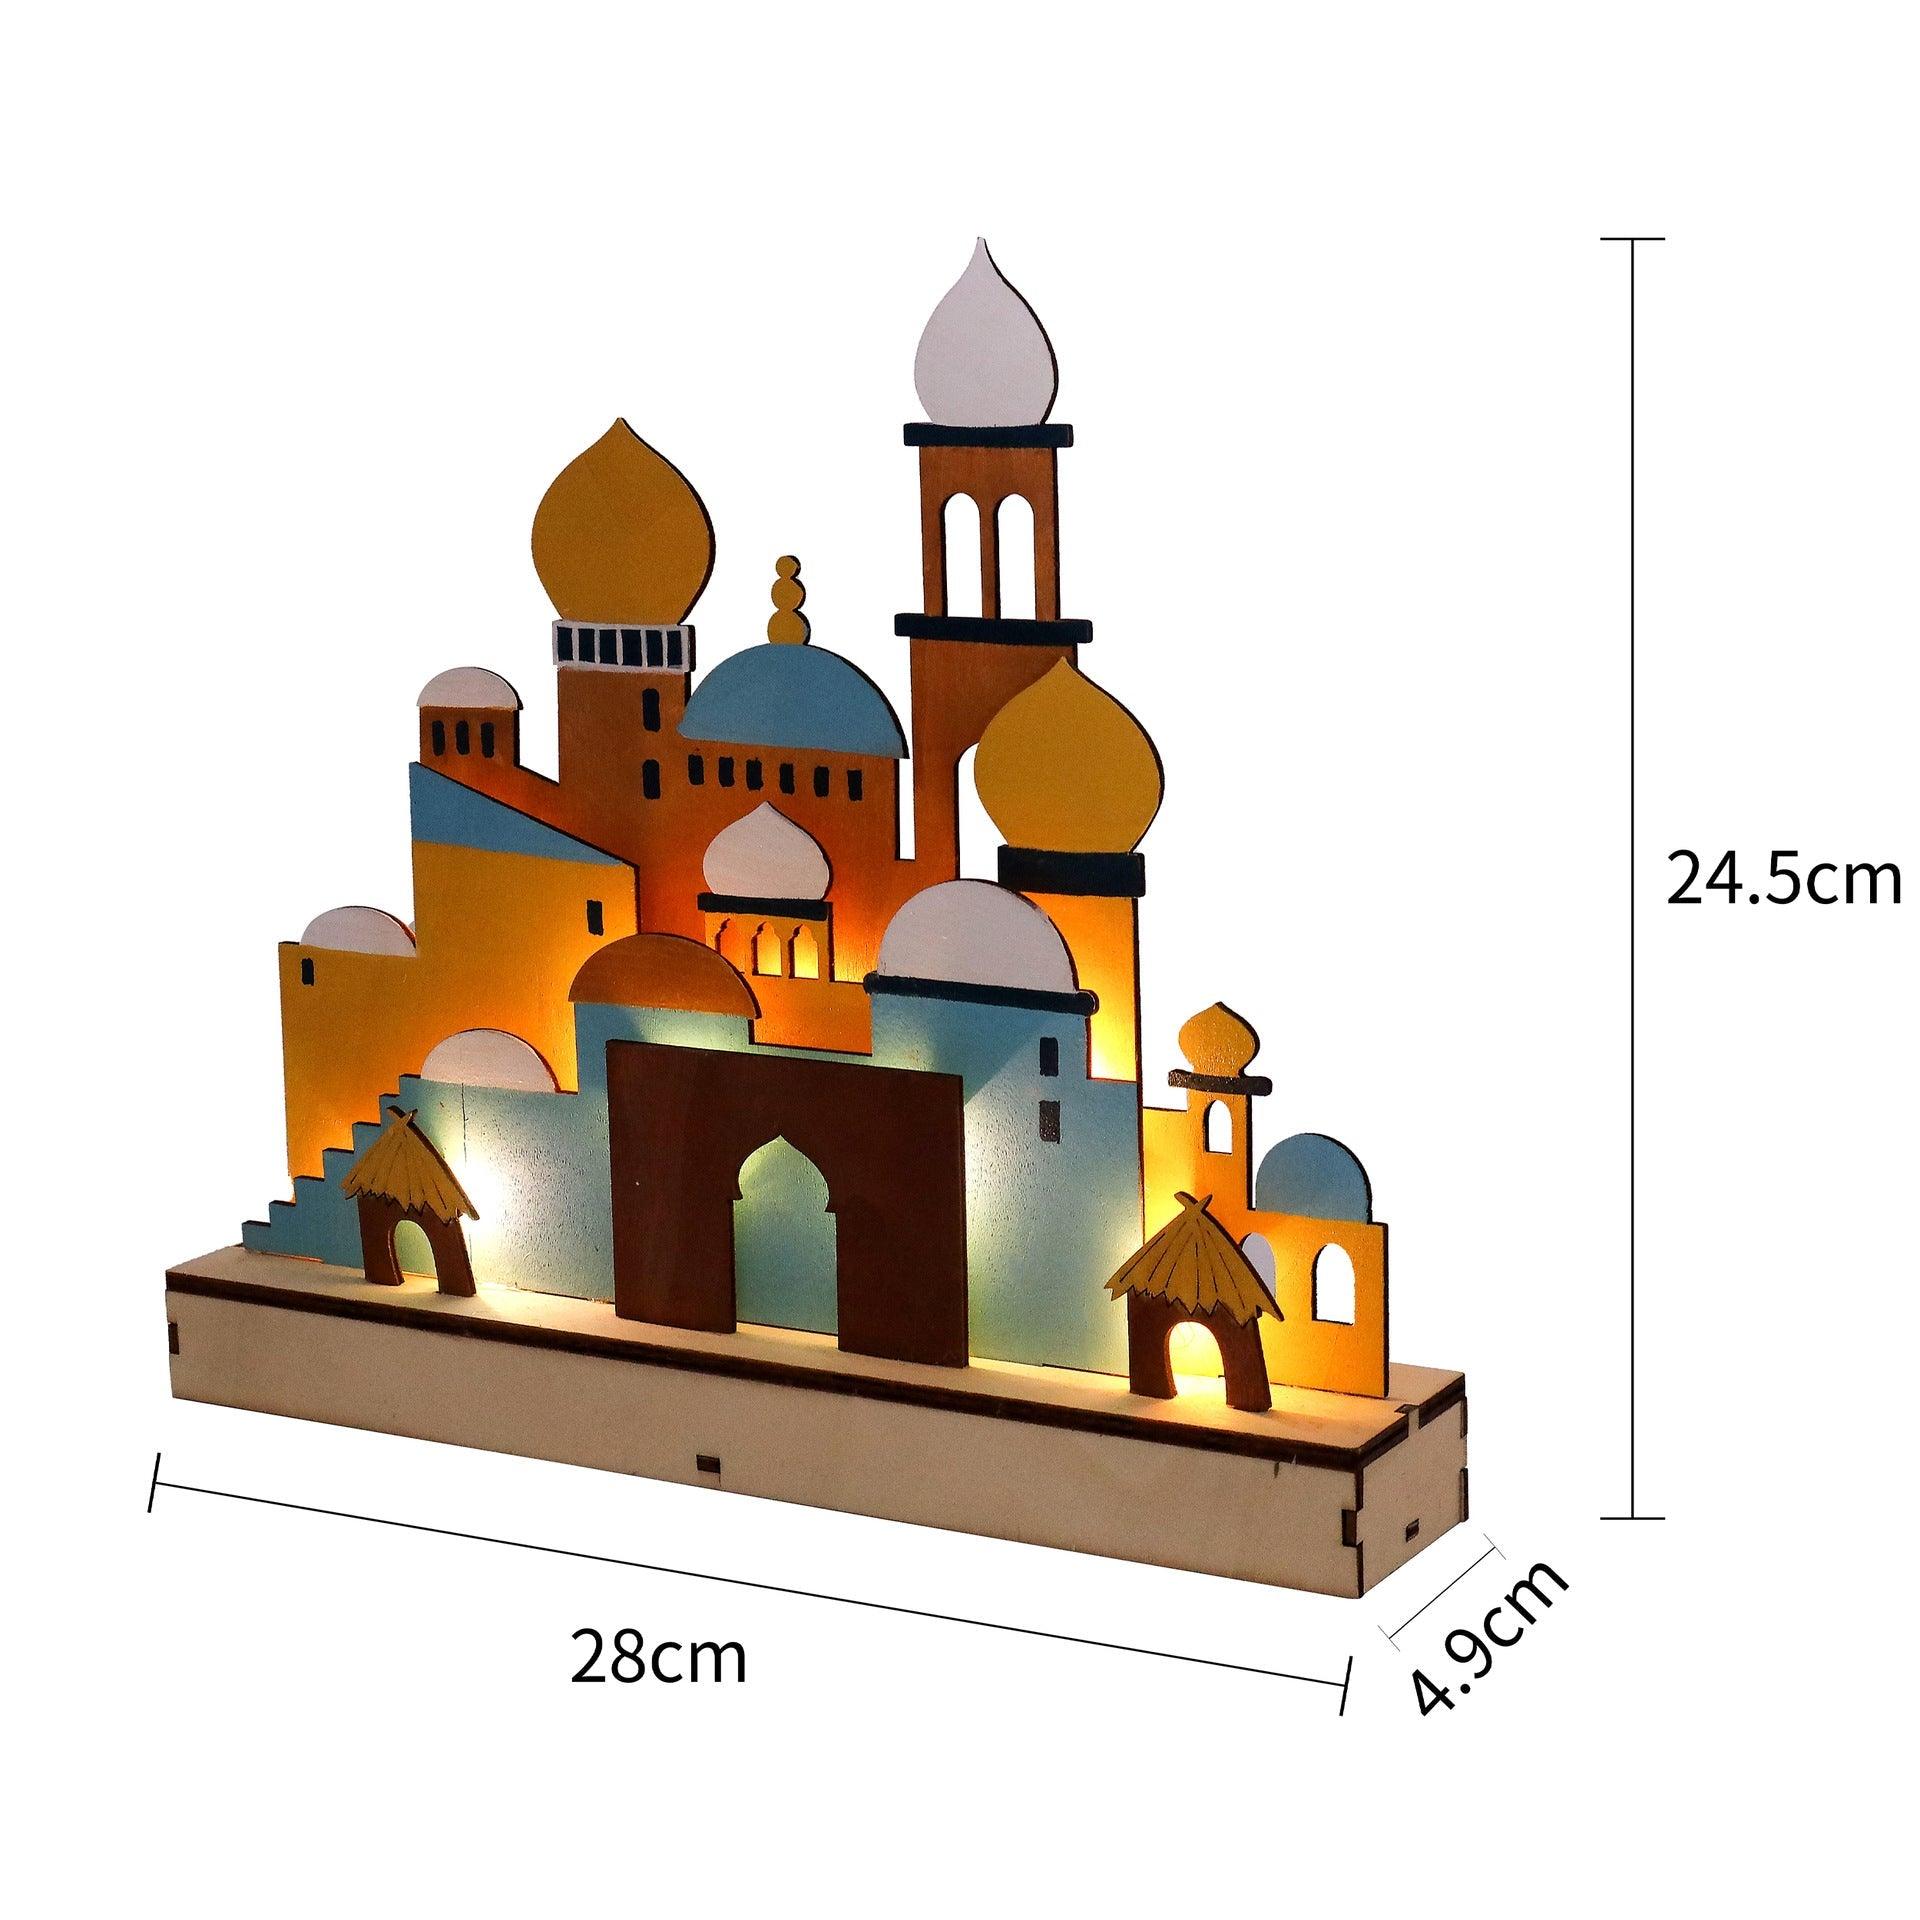 MR059 Wooden LED MASJID Shape Atmosphere Light - Mariam's Collection